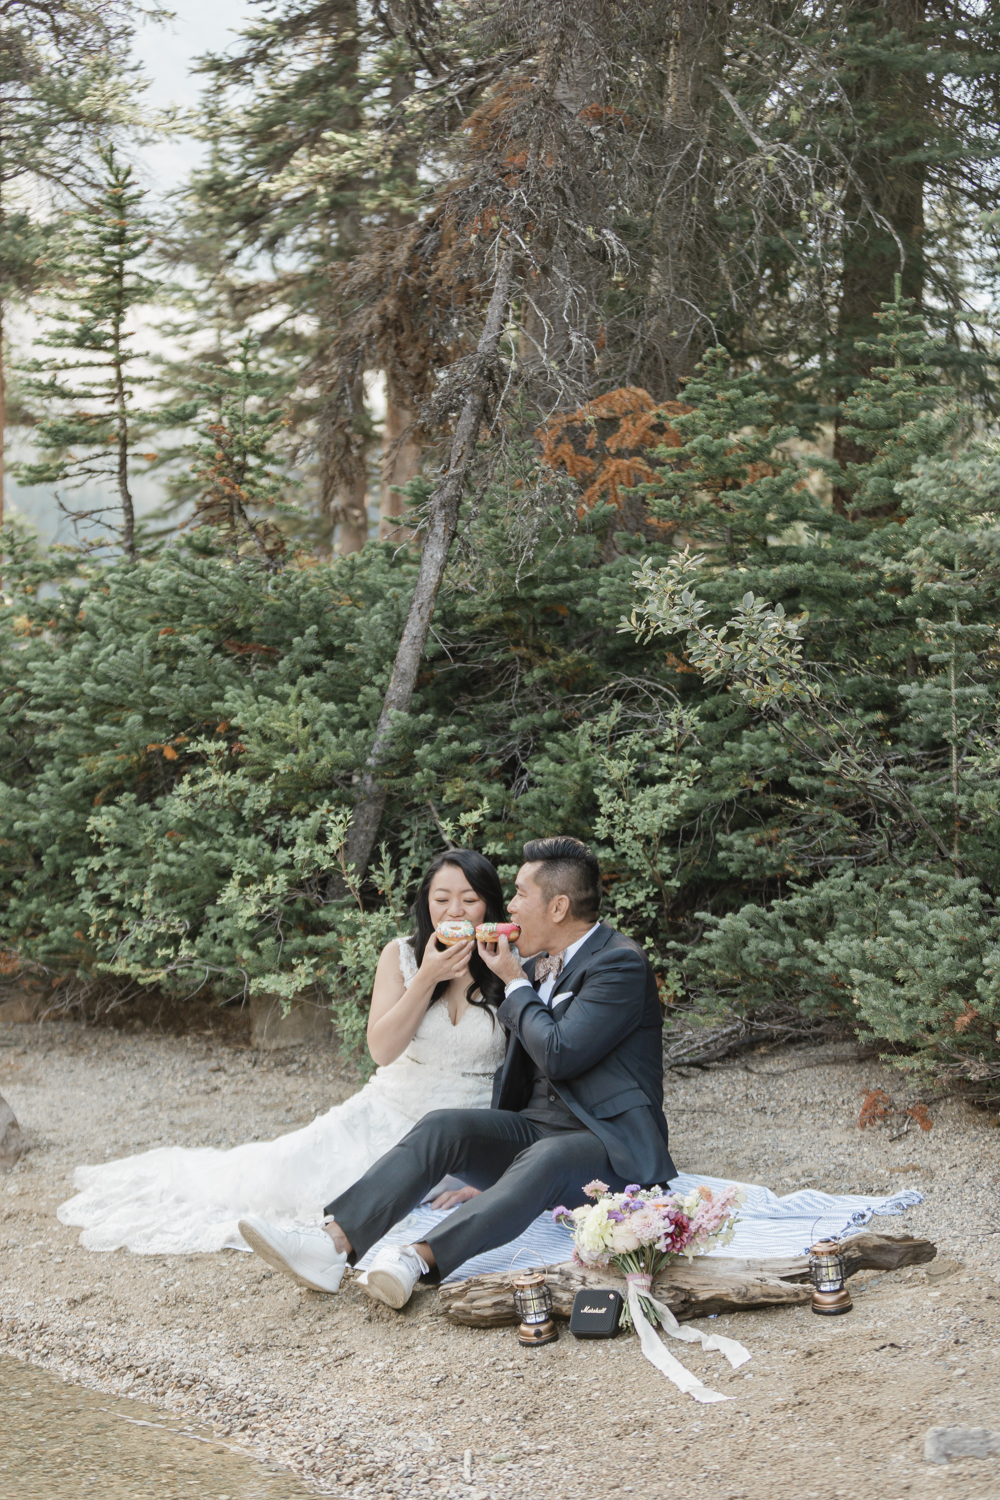 Elopement in Banff National Park eating donuts post champagne pop